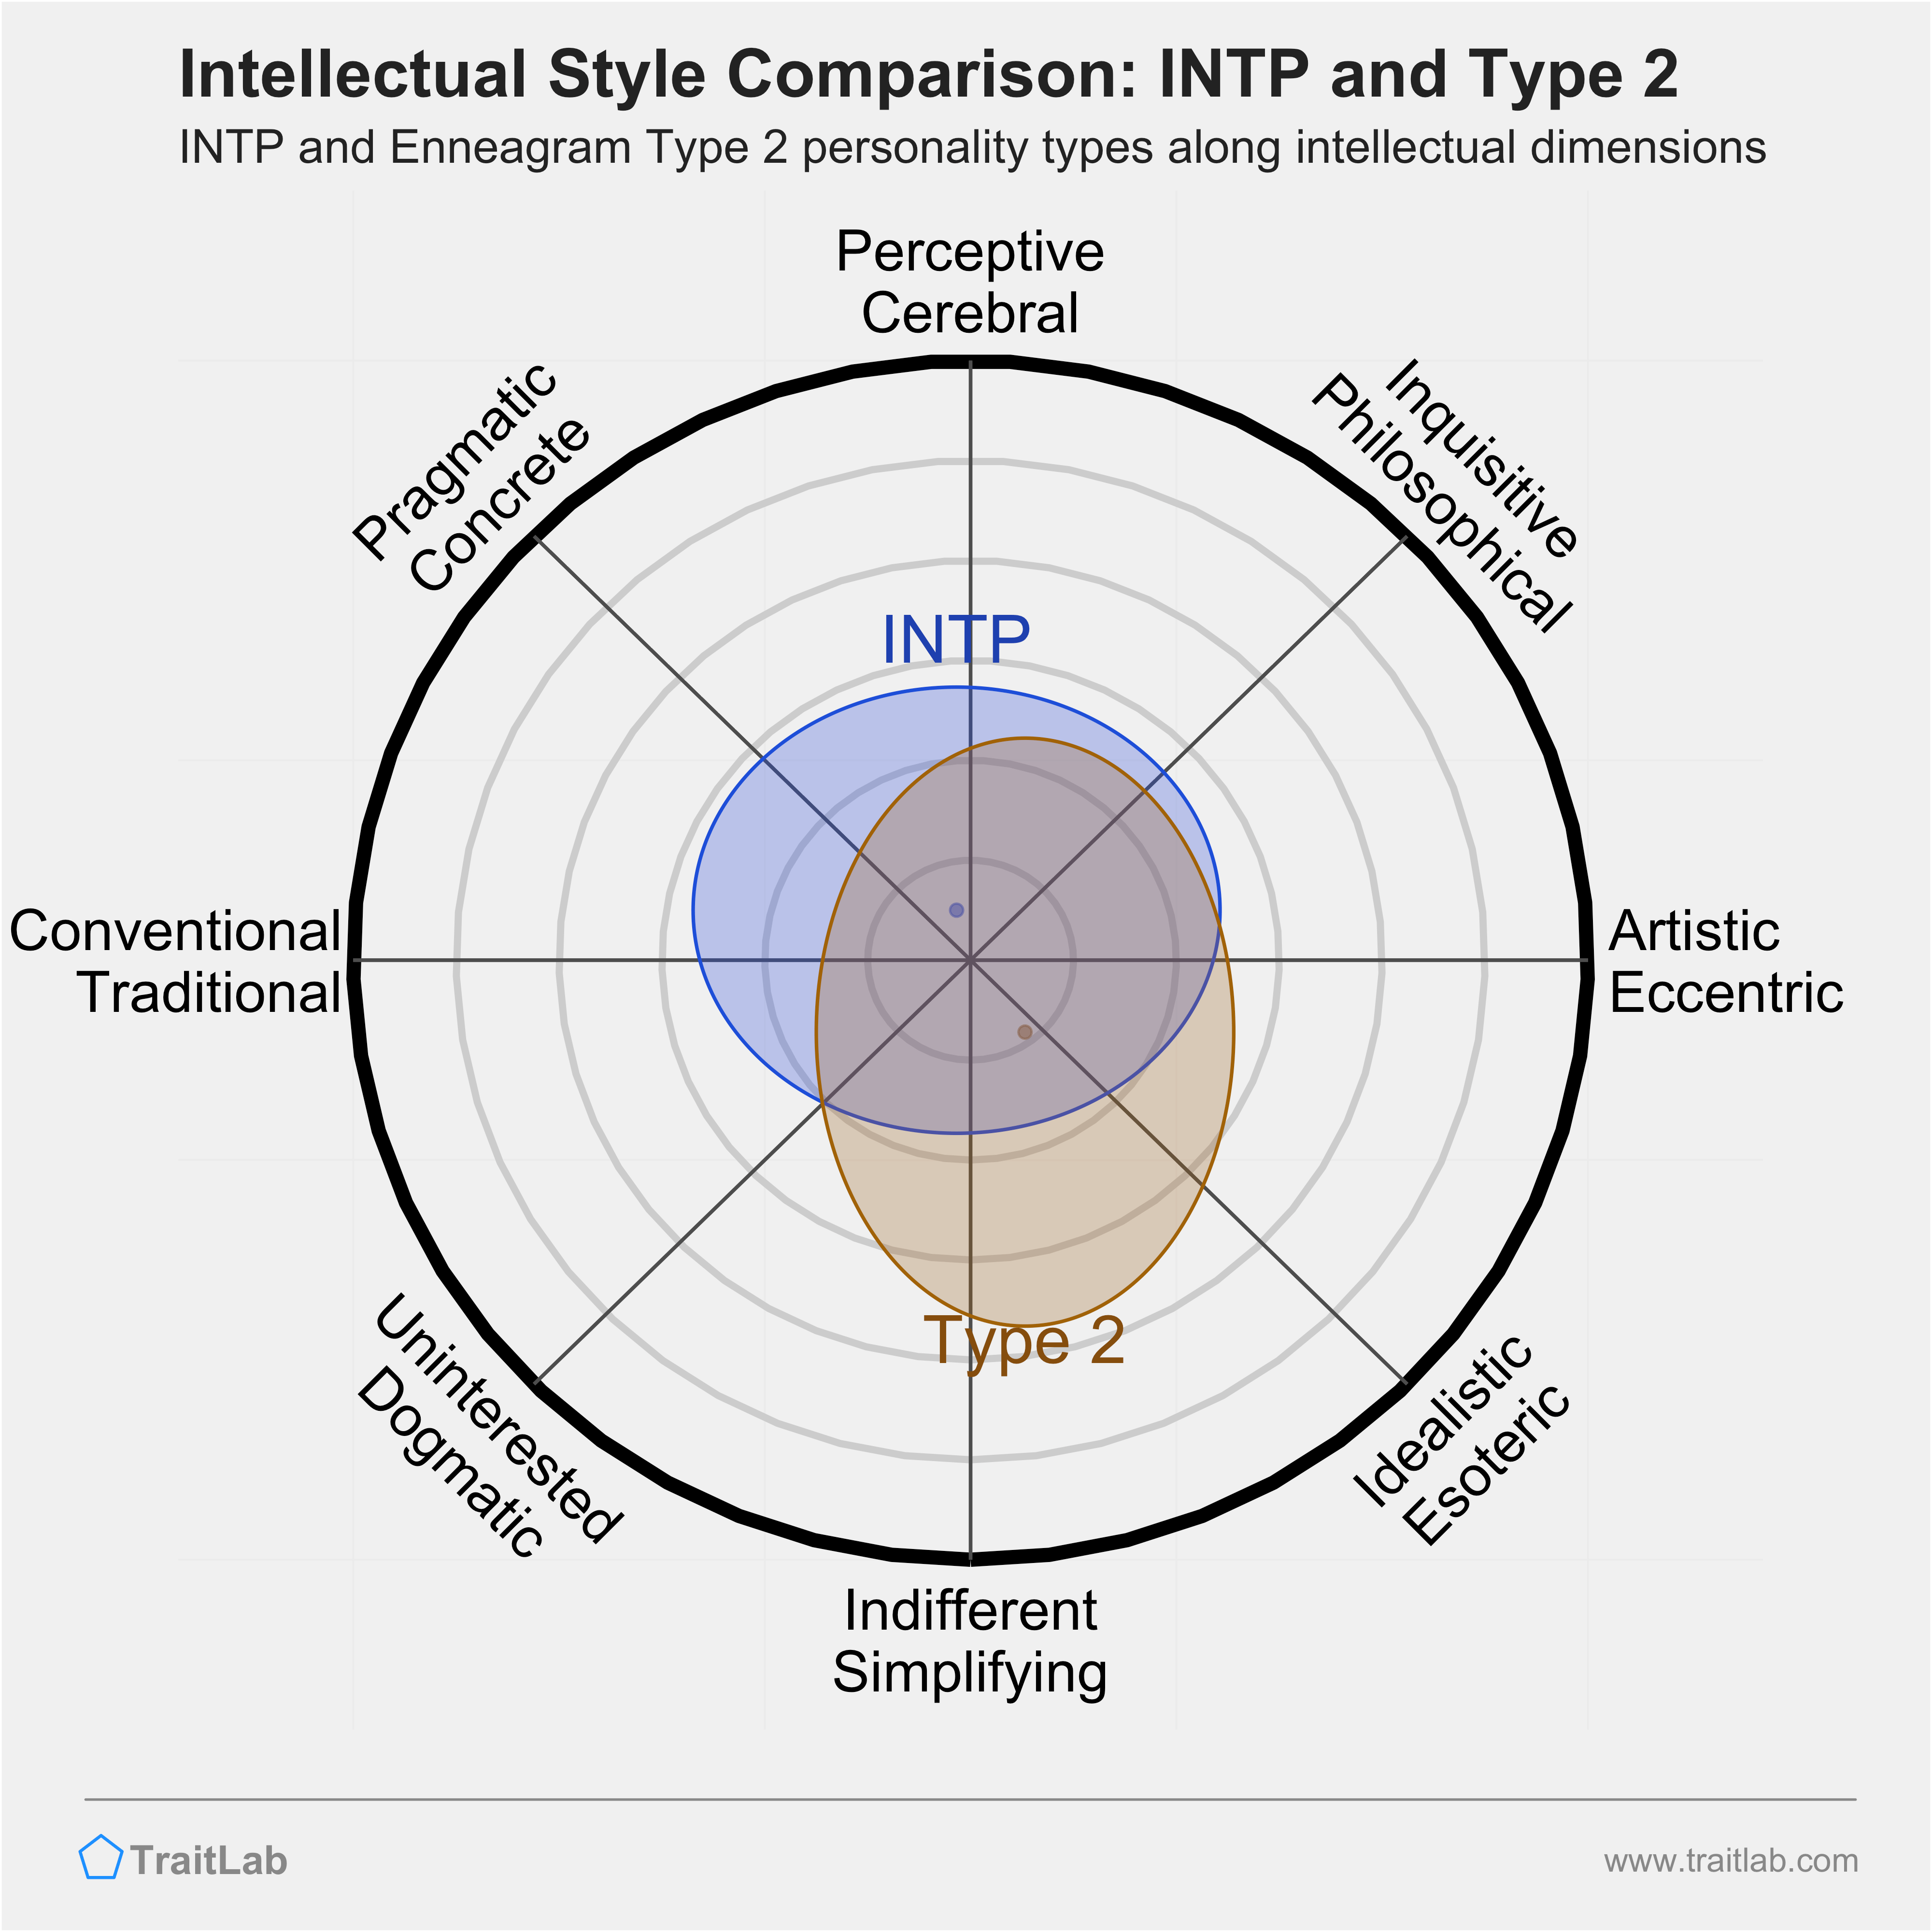 INTP and Type 2 comparison across intellectual dimensions